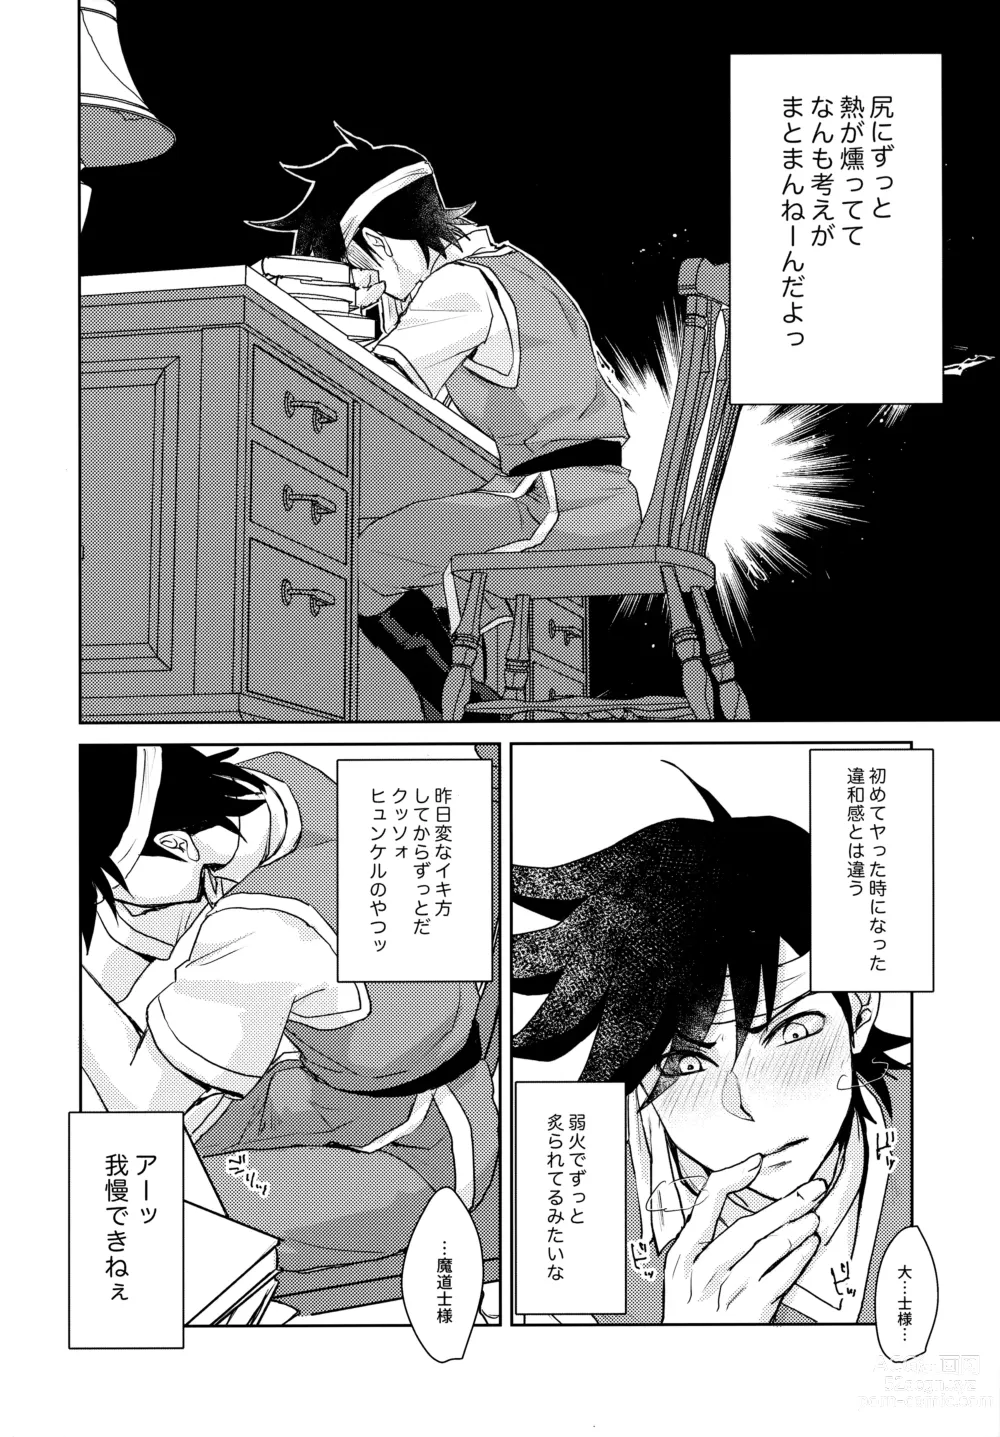 Page 9 of doujinshi You Complete Me!